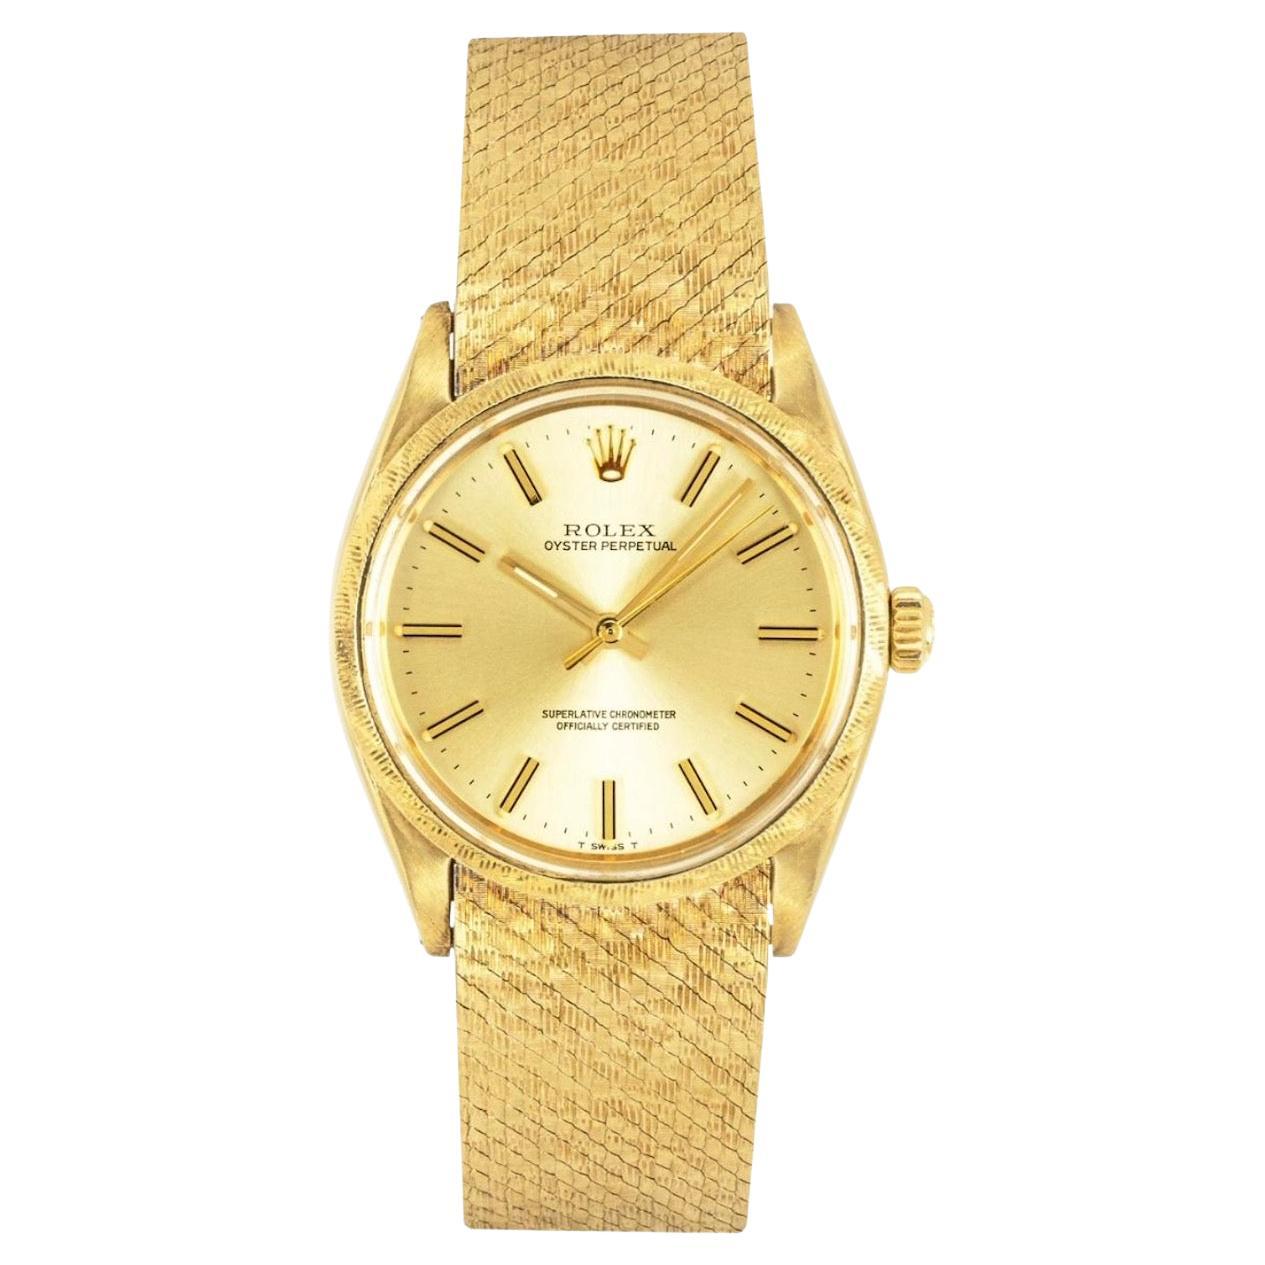 Rolex Seltener Vintage Oyster Perpetual Gelbgold 1035